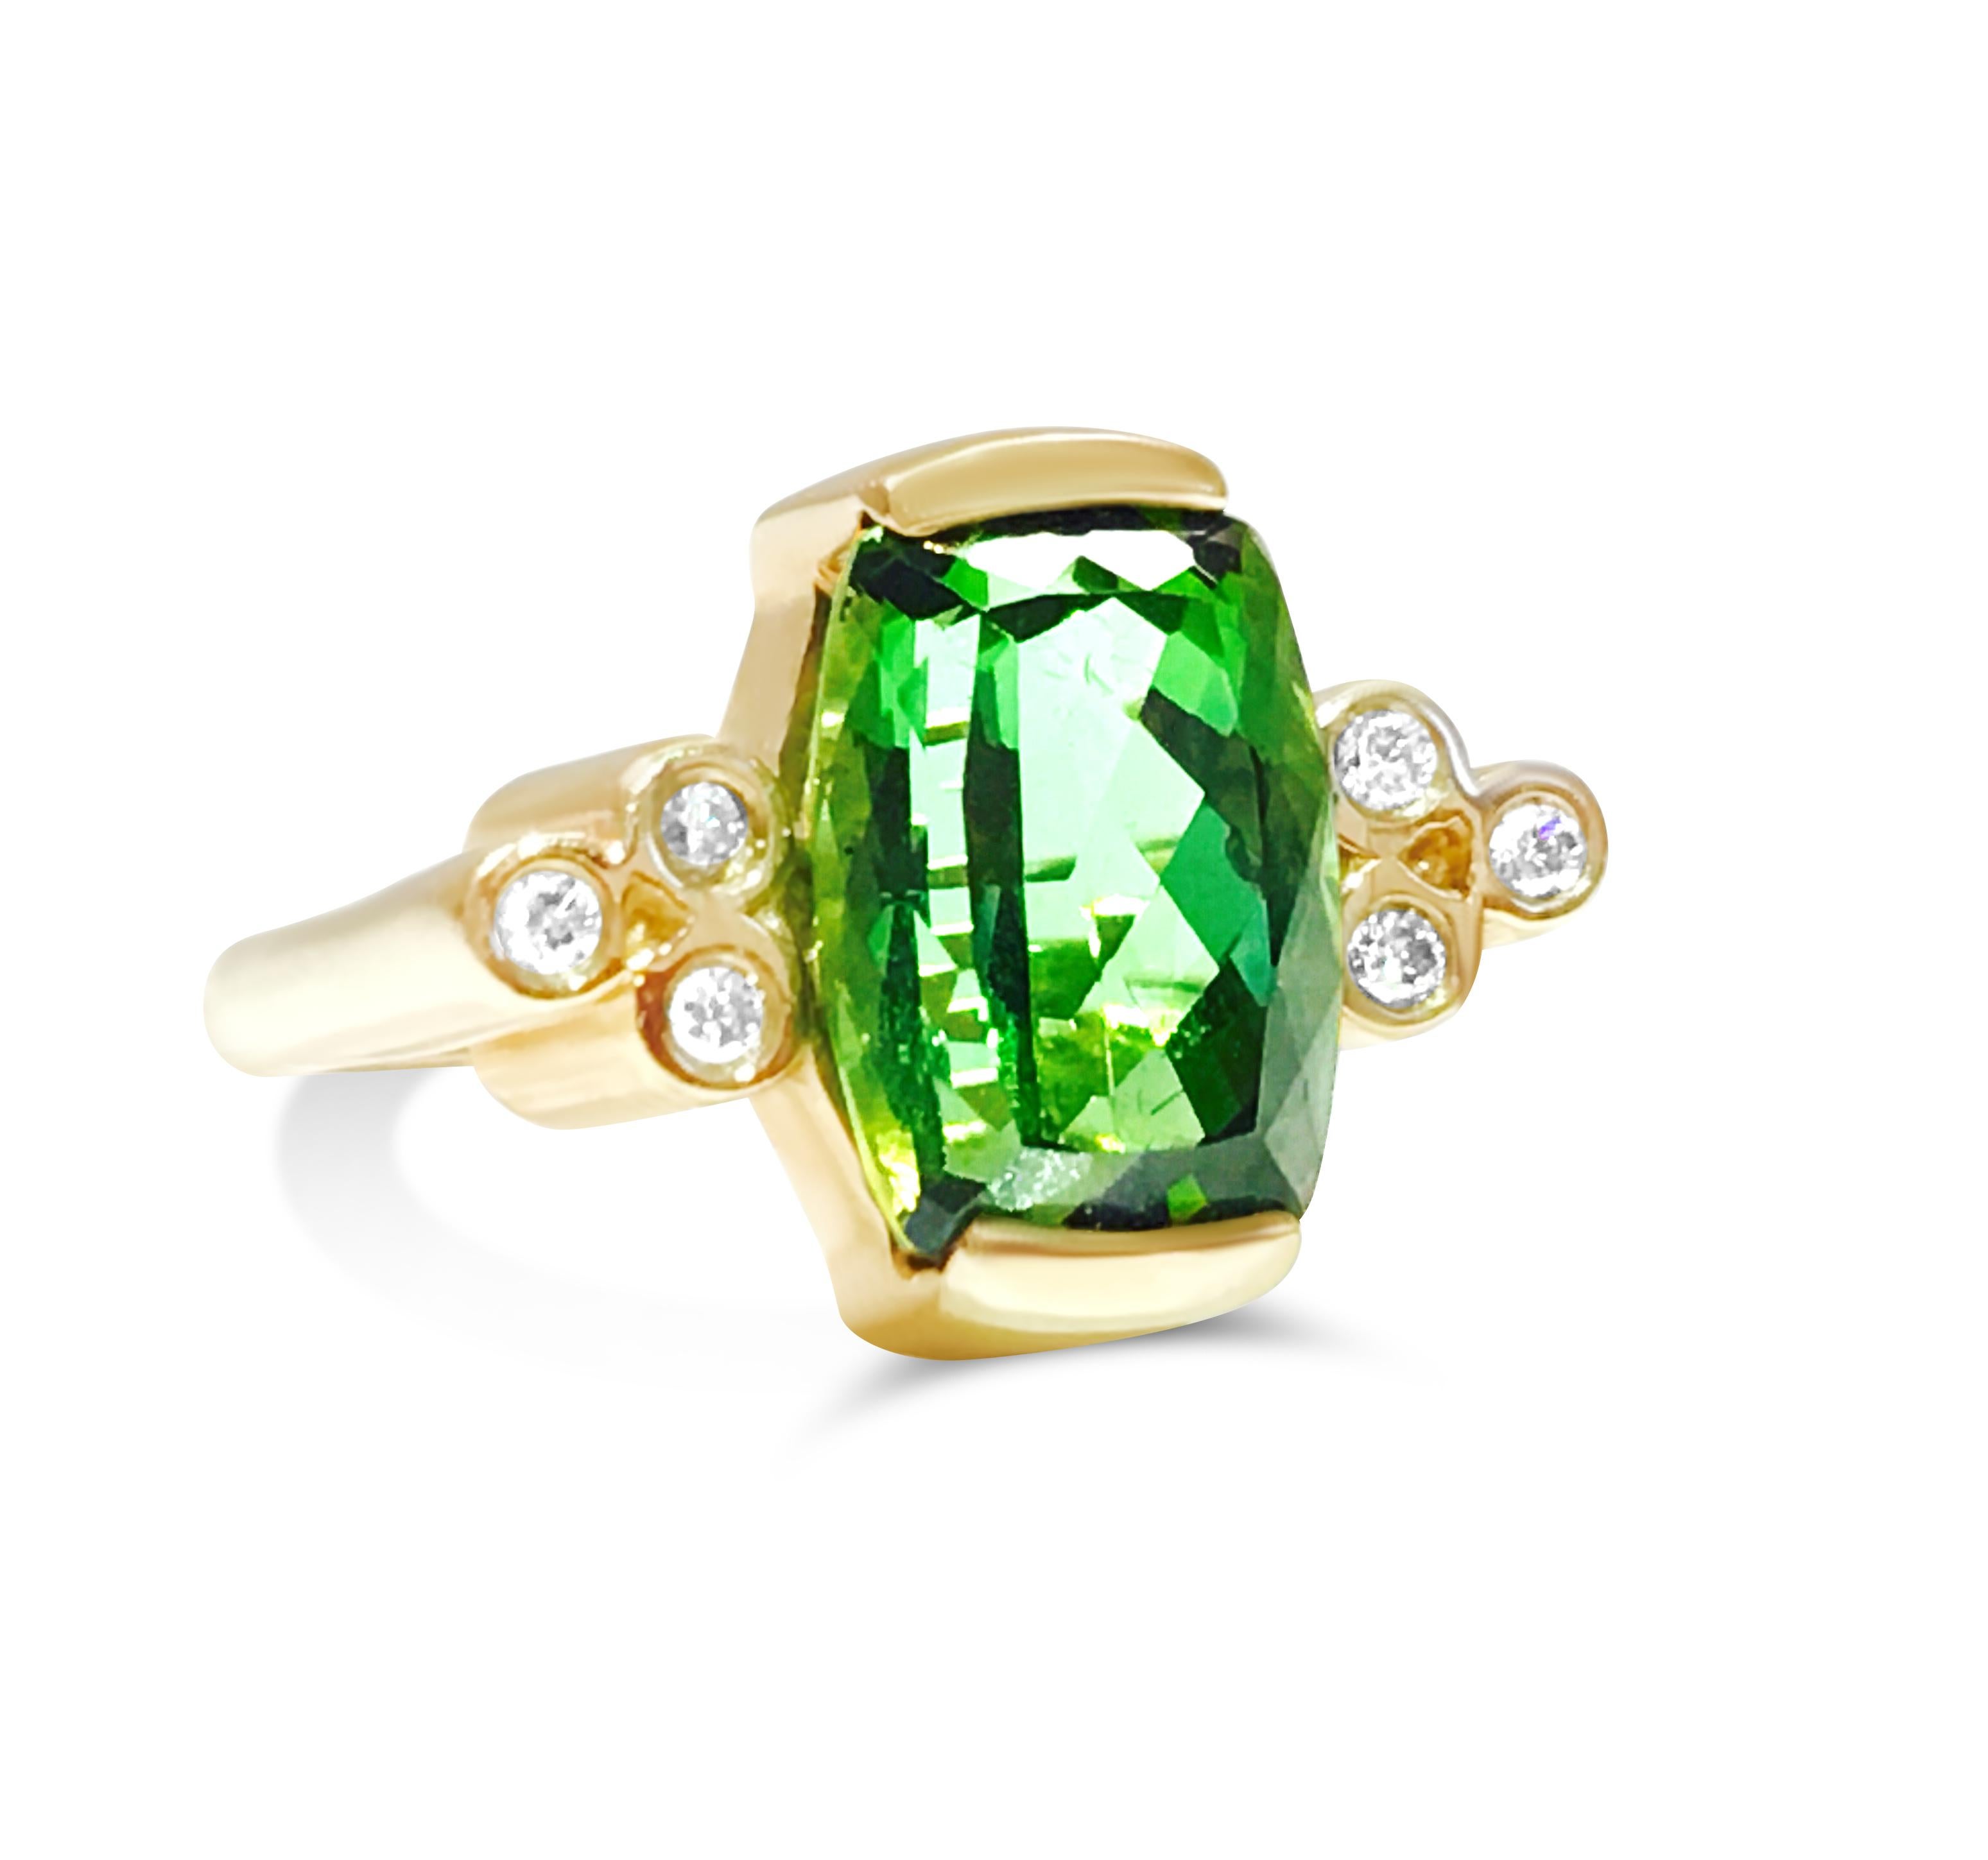 Metal: 14K yellow gold.

Center: 4.00 carat green tourmaline set in channel setting. 100% natural earth mined tourmaline.

0.21 carat side diamonds. VS clarity and F-G color diamonds. 100% natural earth mined and genuine diamonds. Extremely